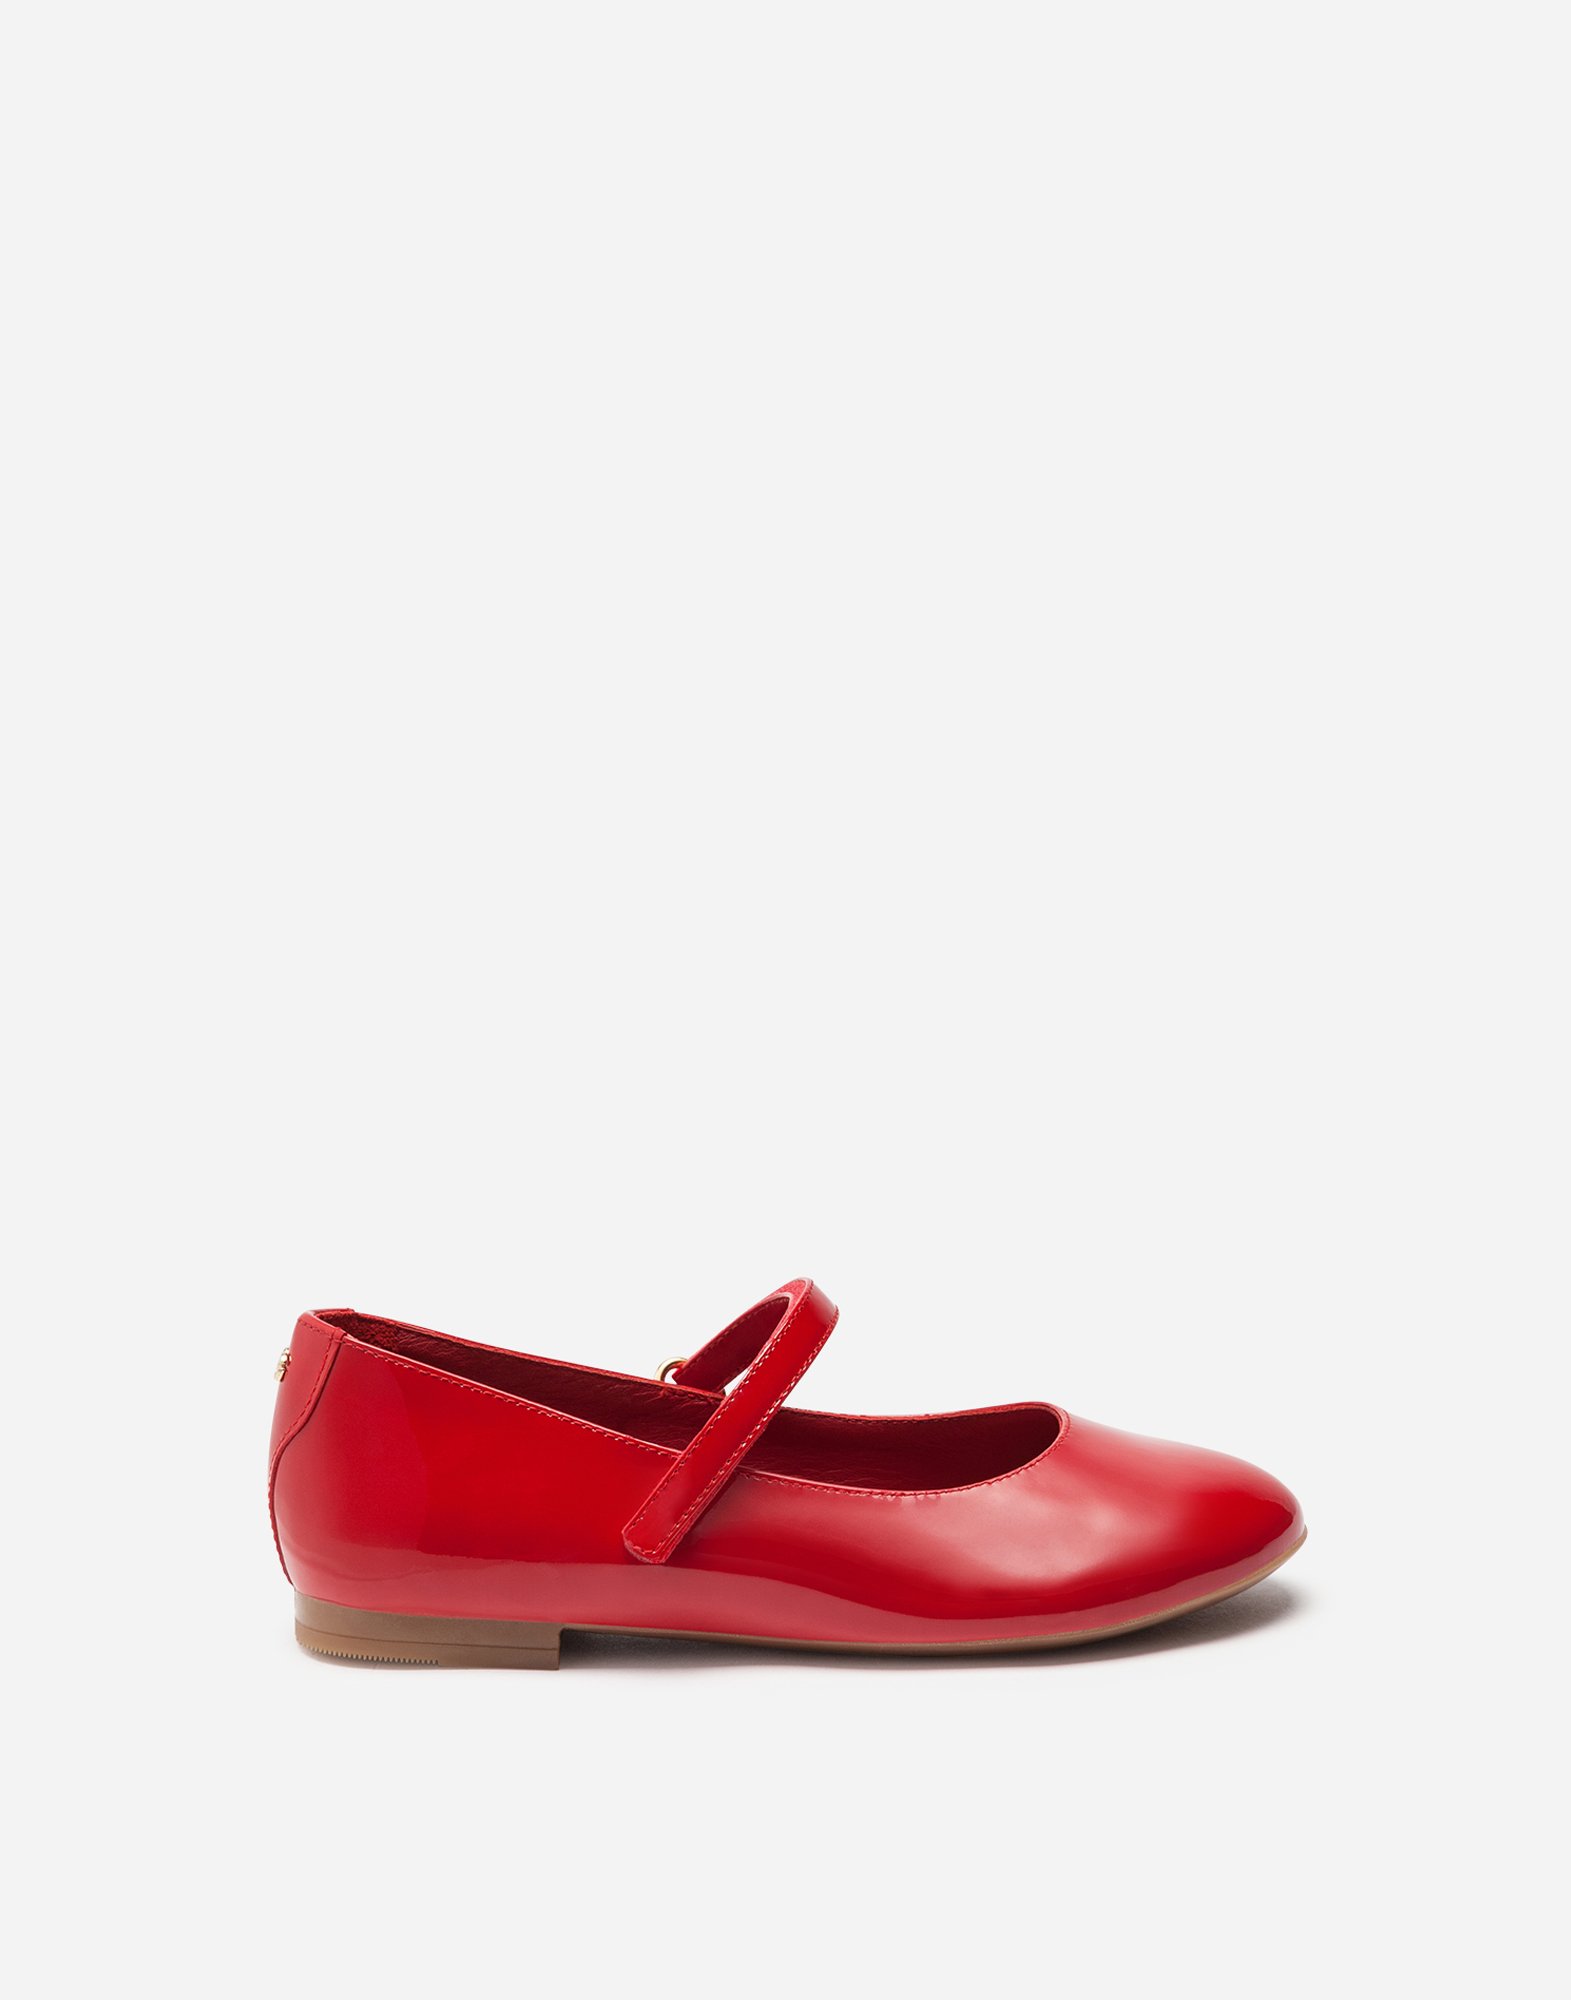 Patent leather mary jane ballet flats in Red